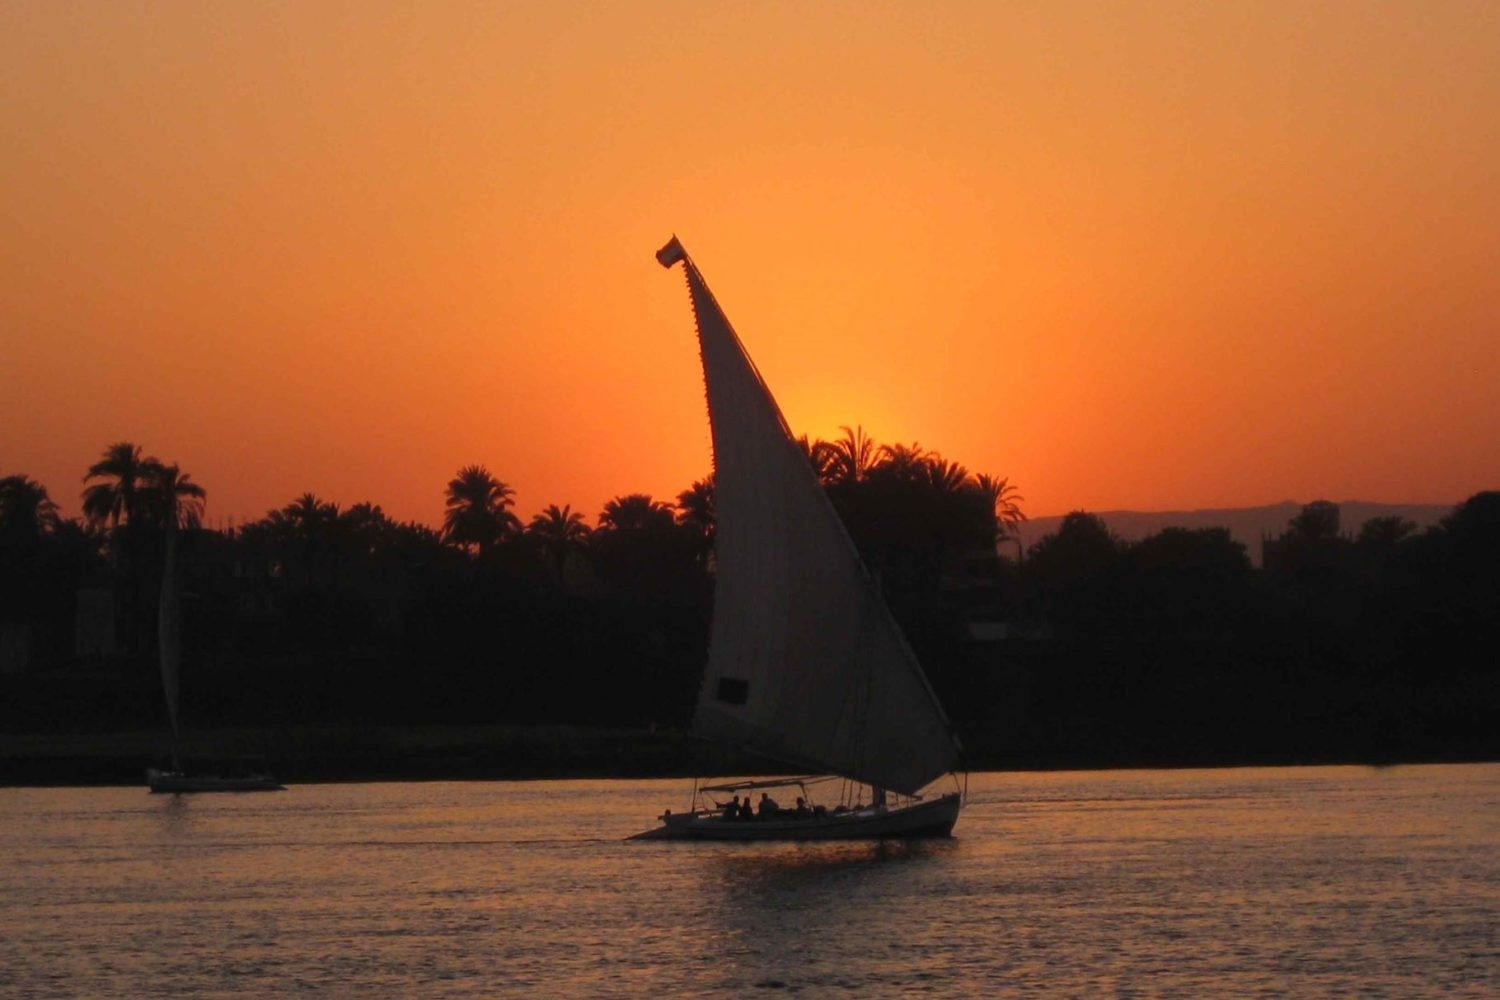 Felucca Ride To The Banana Island In Luxor